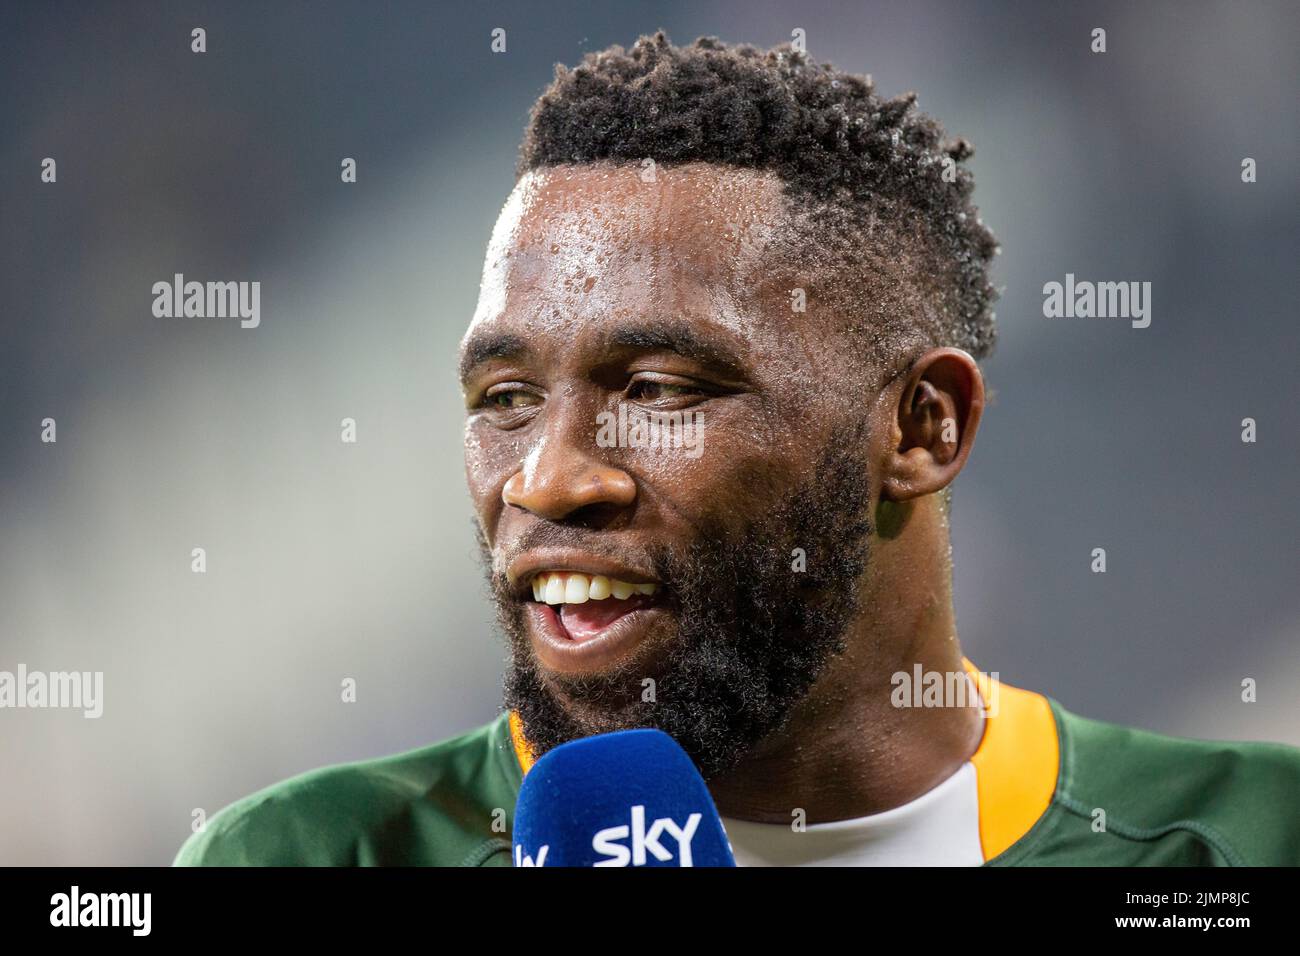 Mbombela, Nelspruit, South Africa. 6th August, 2022. Nelspruit, South Africa, on 6 August 2020.Smiling Siya Kolisi interviewed by media after beating the All Blacks in the Rugby Championship international rugby match between South Africa and New Zealand at the Mbombela Stadium Credit: AfriPics.com/Alamy Live News Stock Photo